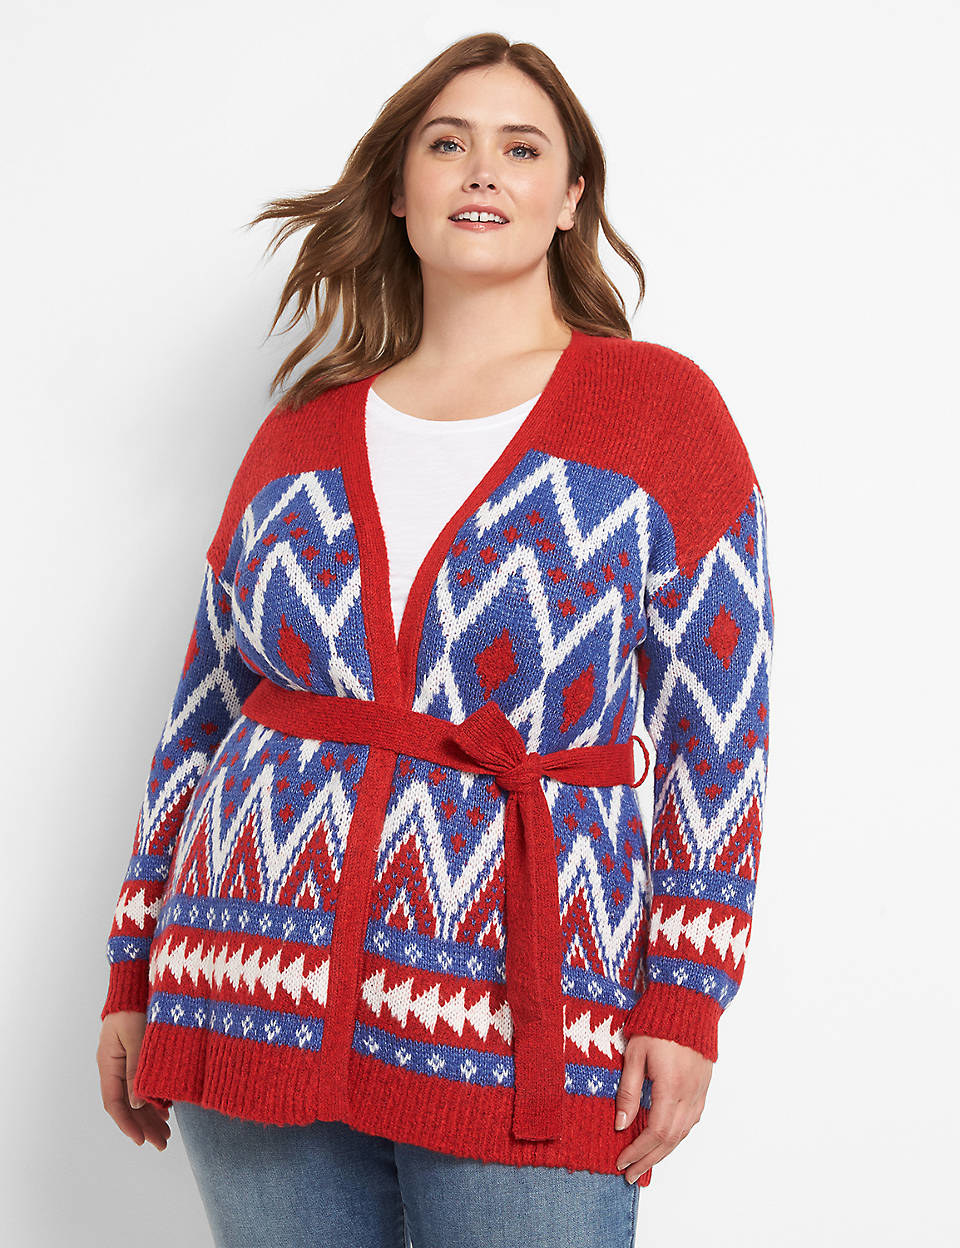 model wearing the belted cardigan with a red, white, and blue pattern